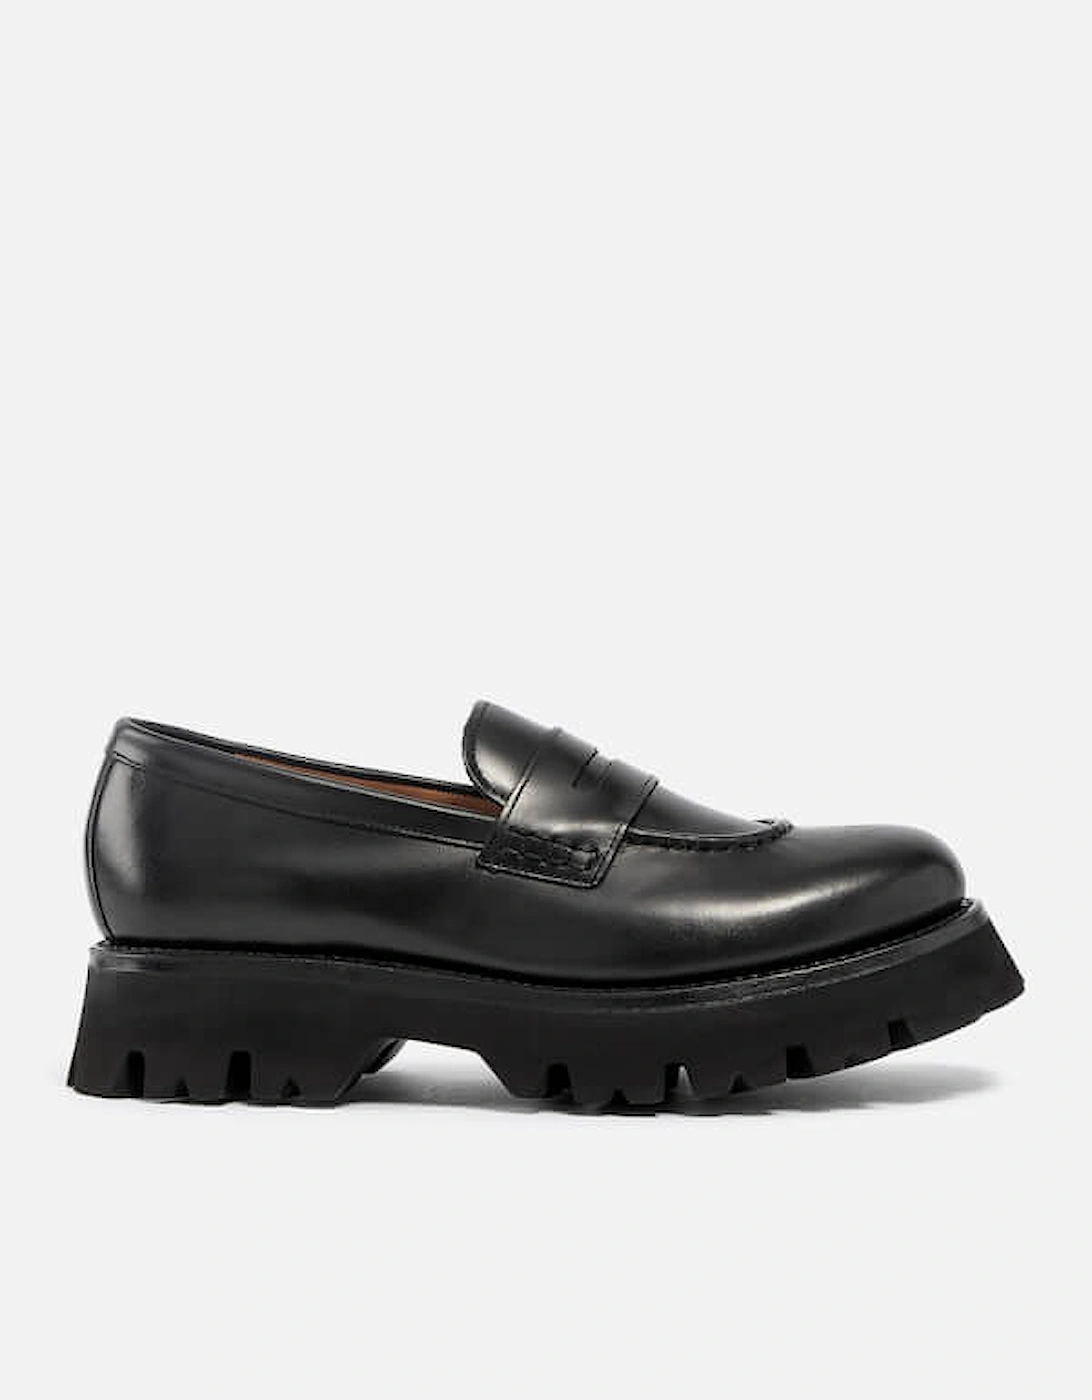 Hattie Leather Loafers - - Home - Women's Shoes - Women's Brogues and Loafers - Hattie Leather Loafers, 3 of 2